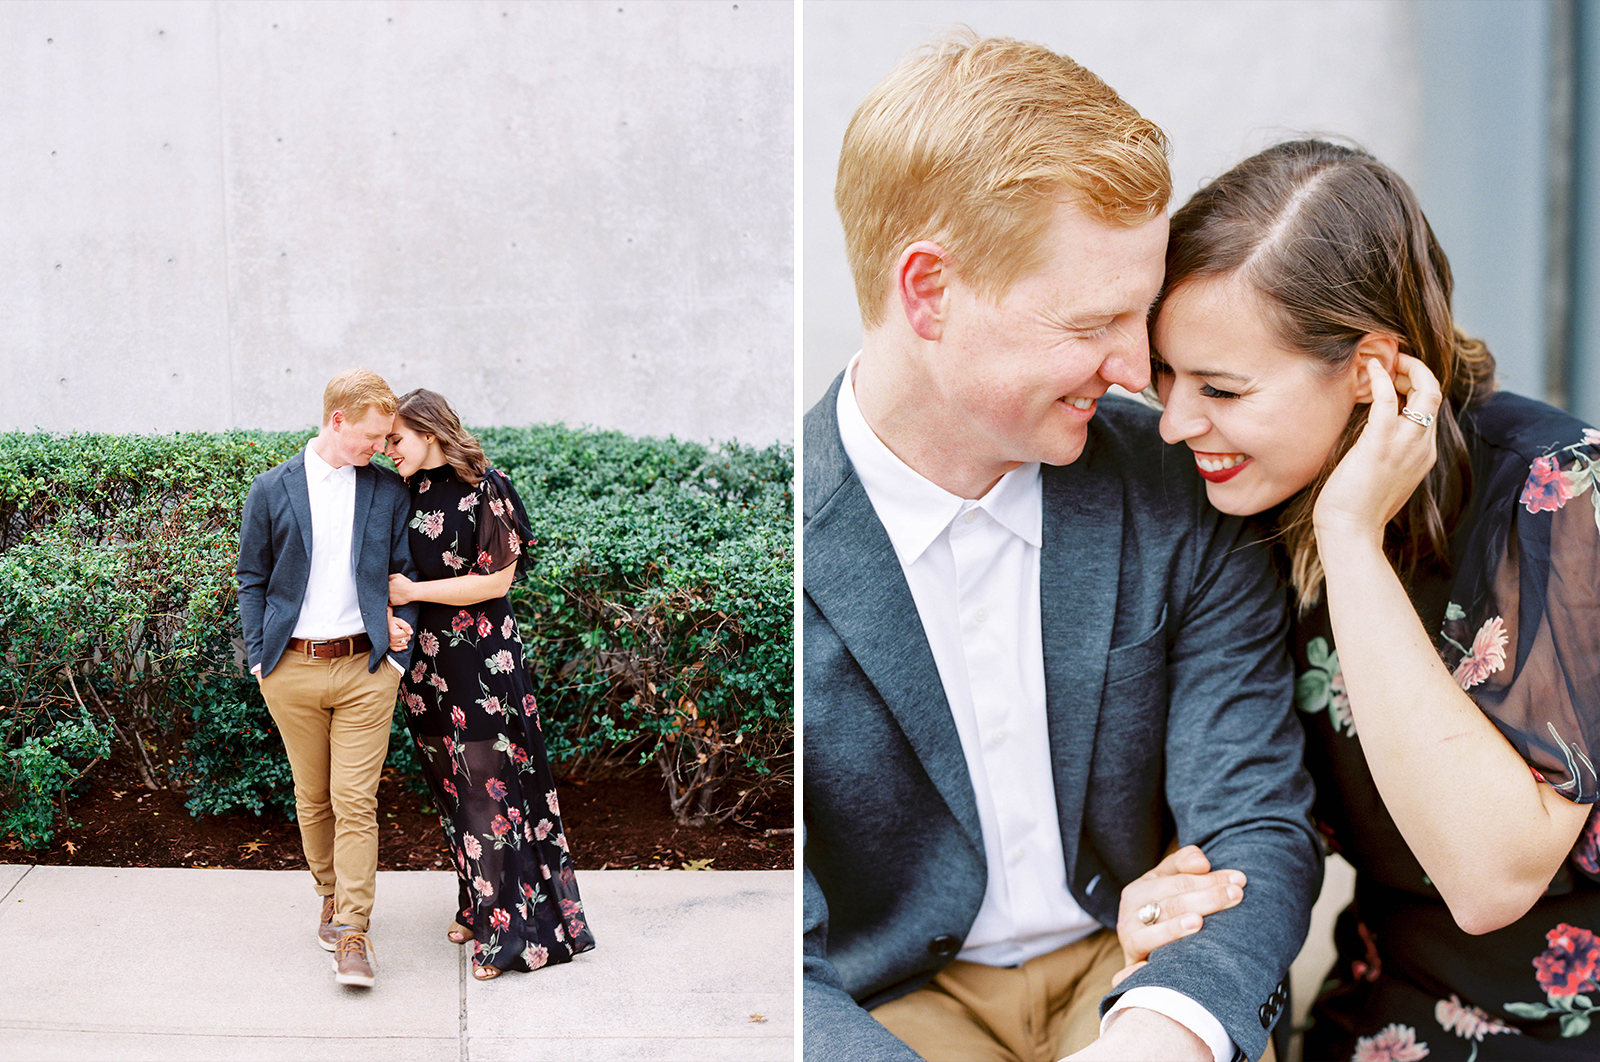 Fall/Winter Engagement Session Outfit Guide